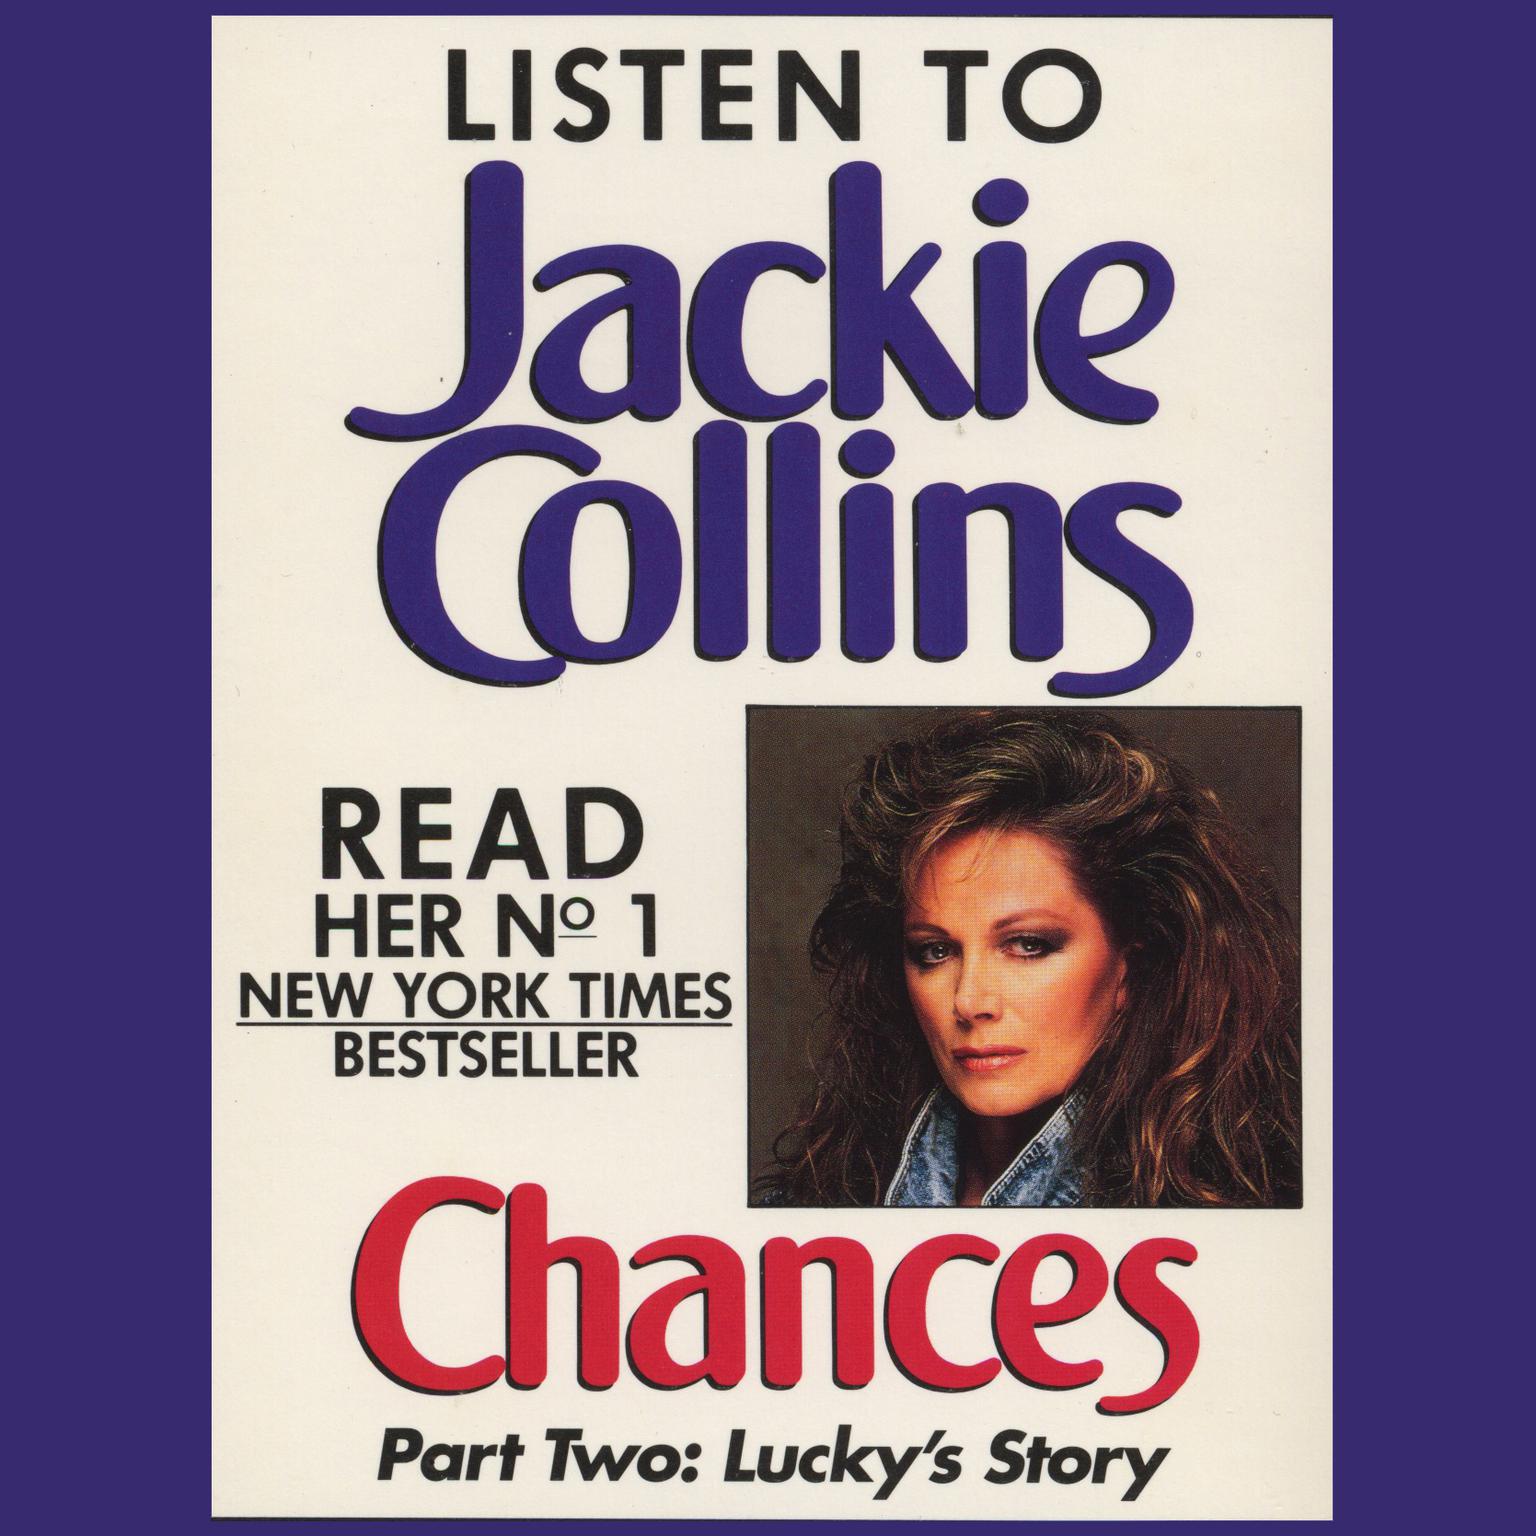 Chances Part 2 (Abridged): Luckys Story Audiobook, by Jackie Collins